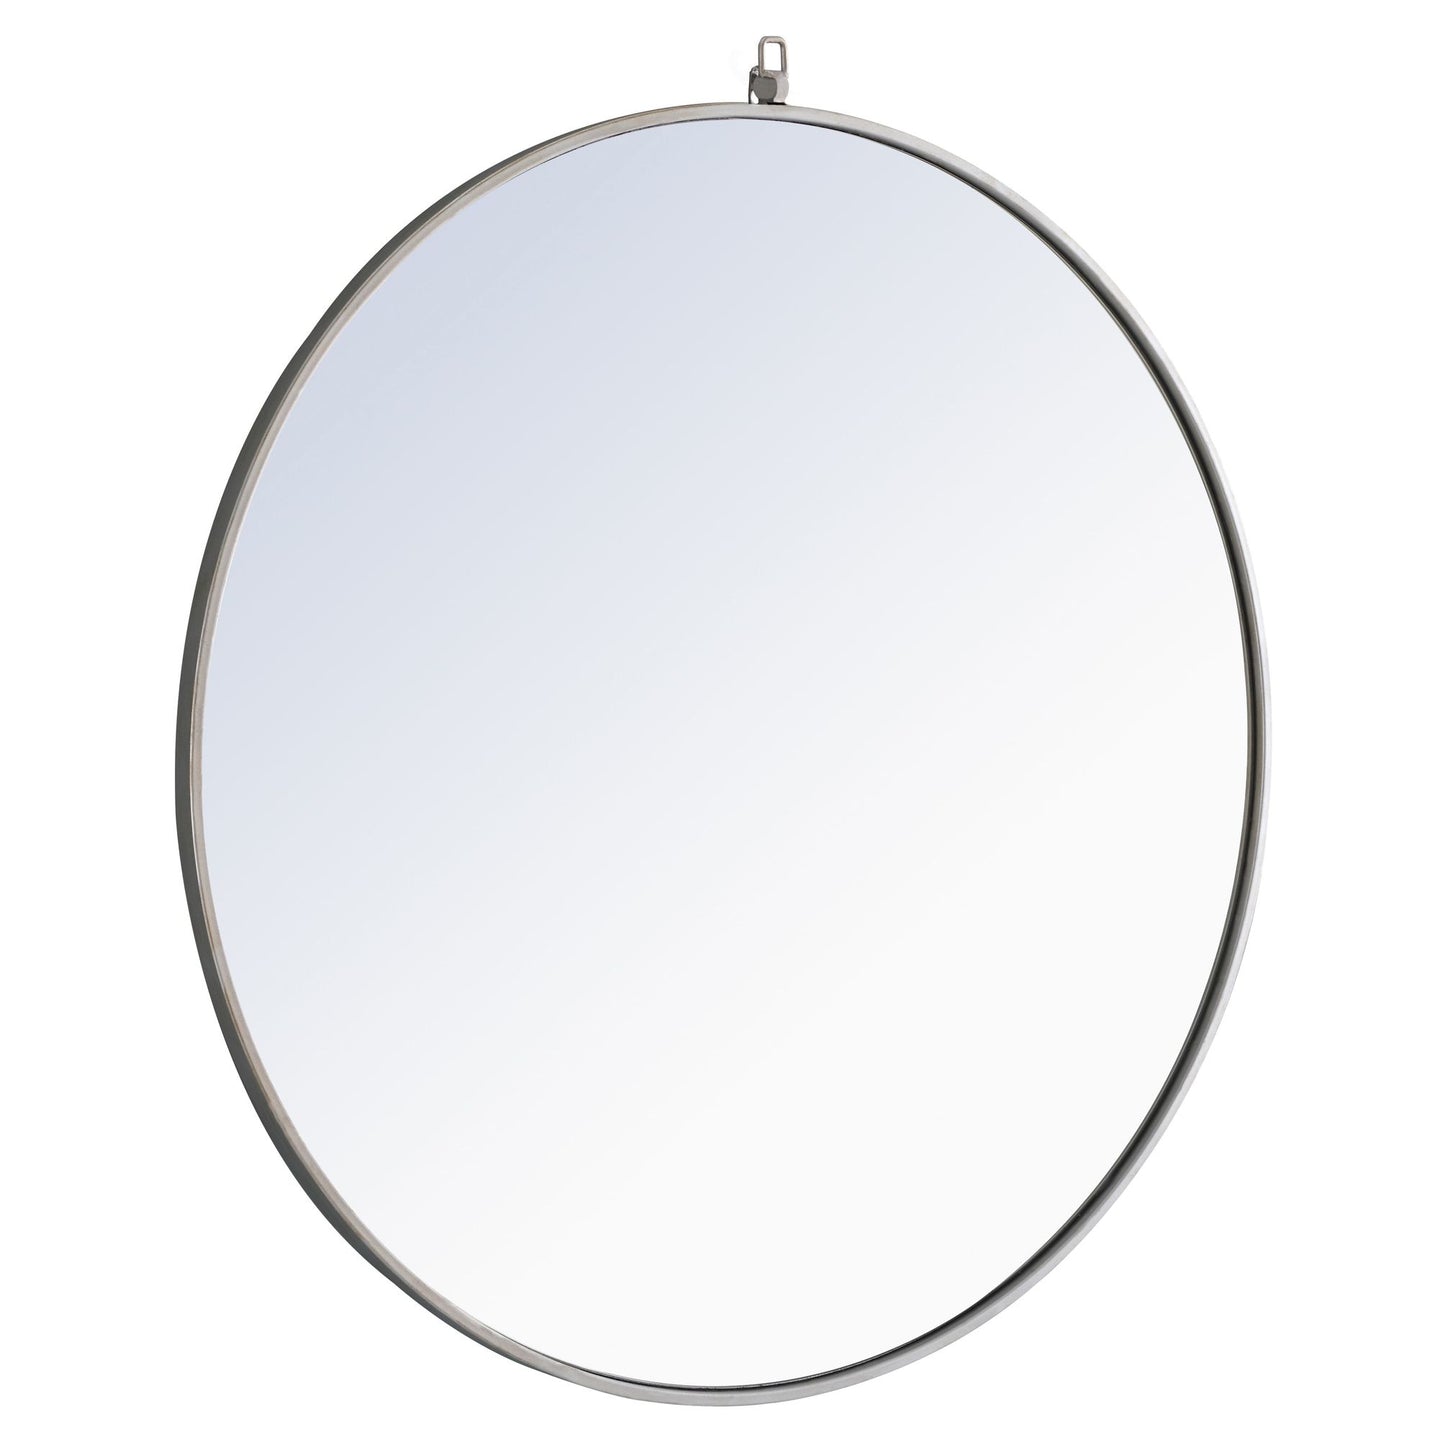 MR4066S Rowan 42" x 42" Metal Framed Round Mirror with Decorative Hook in Silver